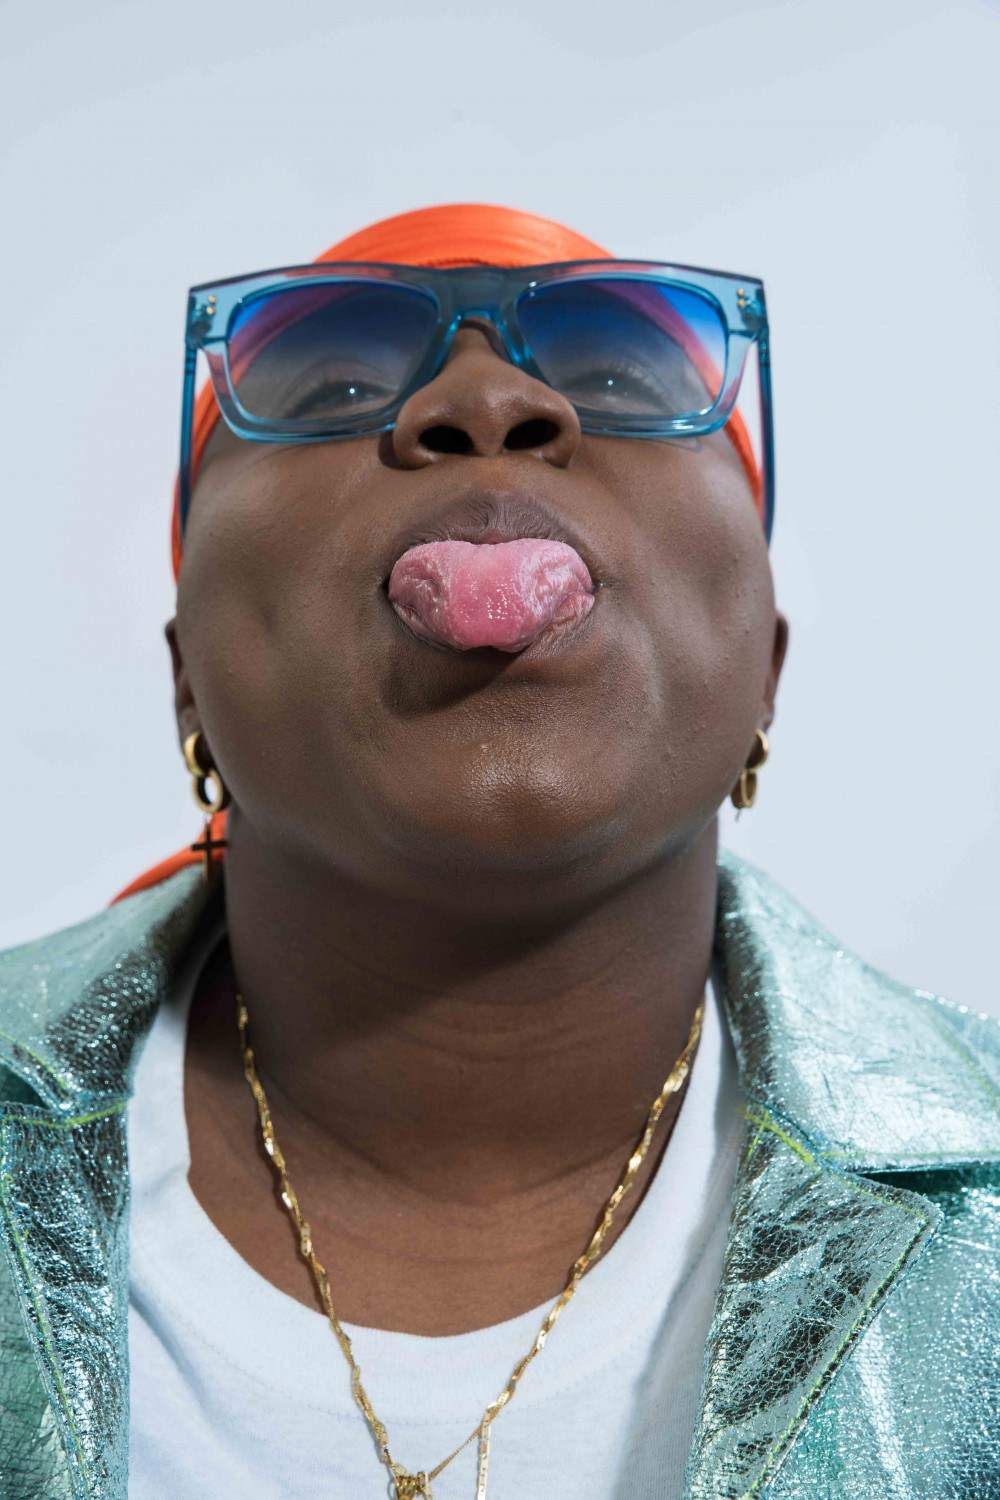 Nigerian Singer, Teni Apata accused of being a lesbian